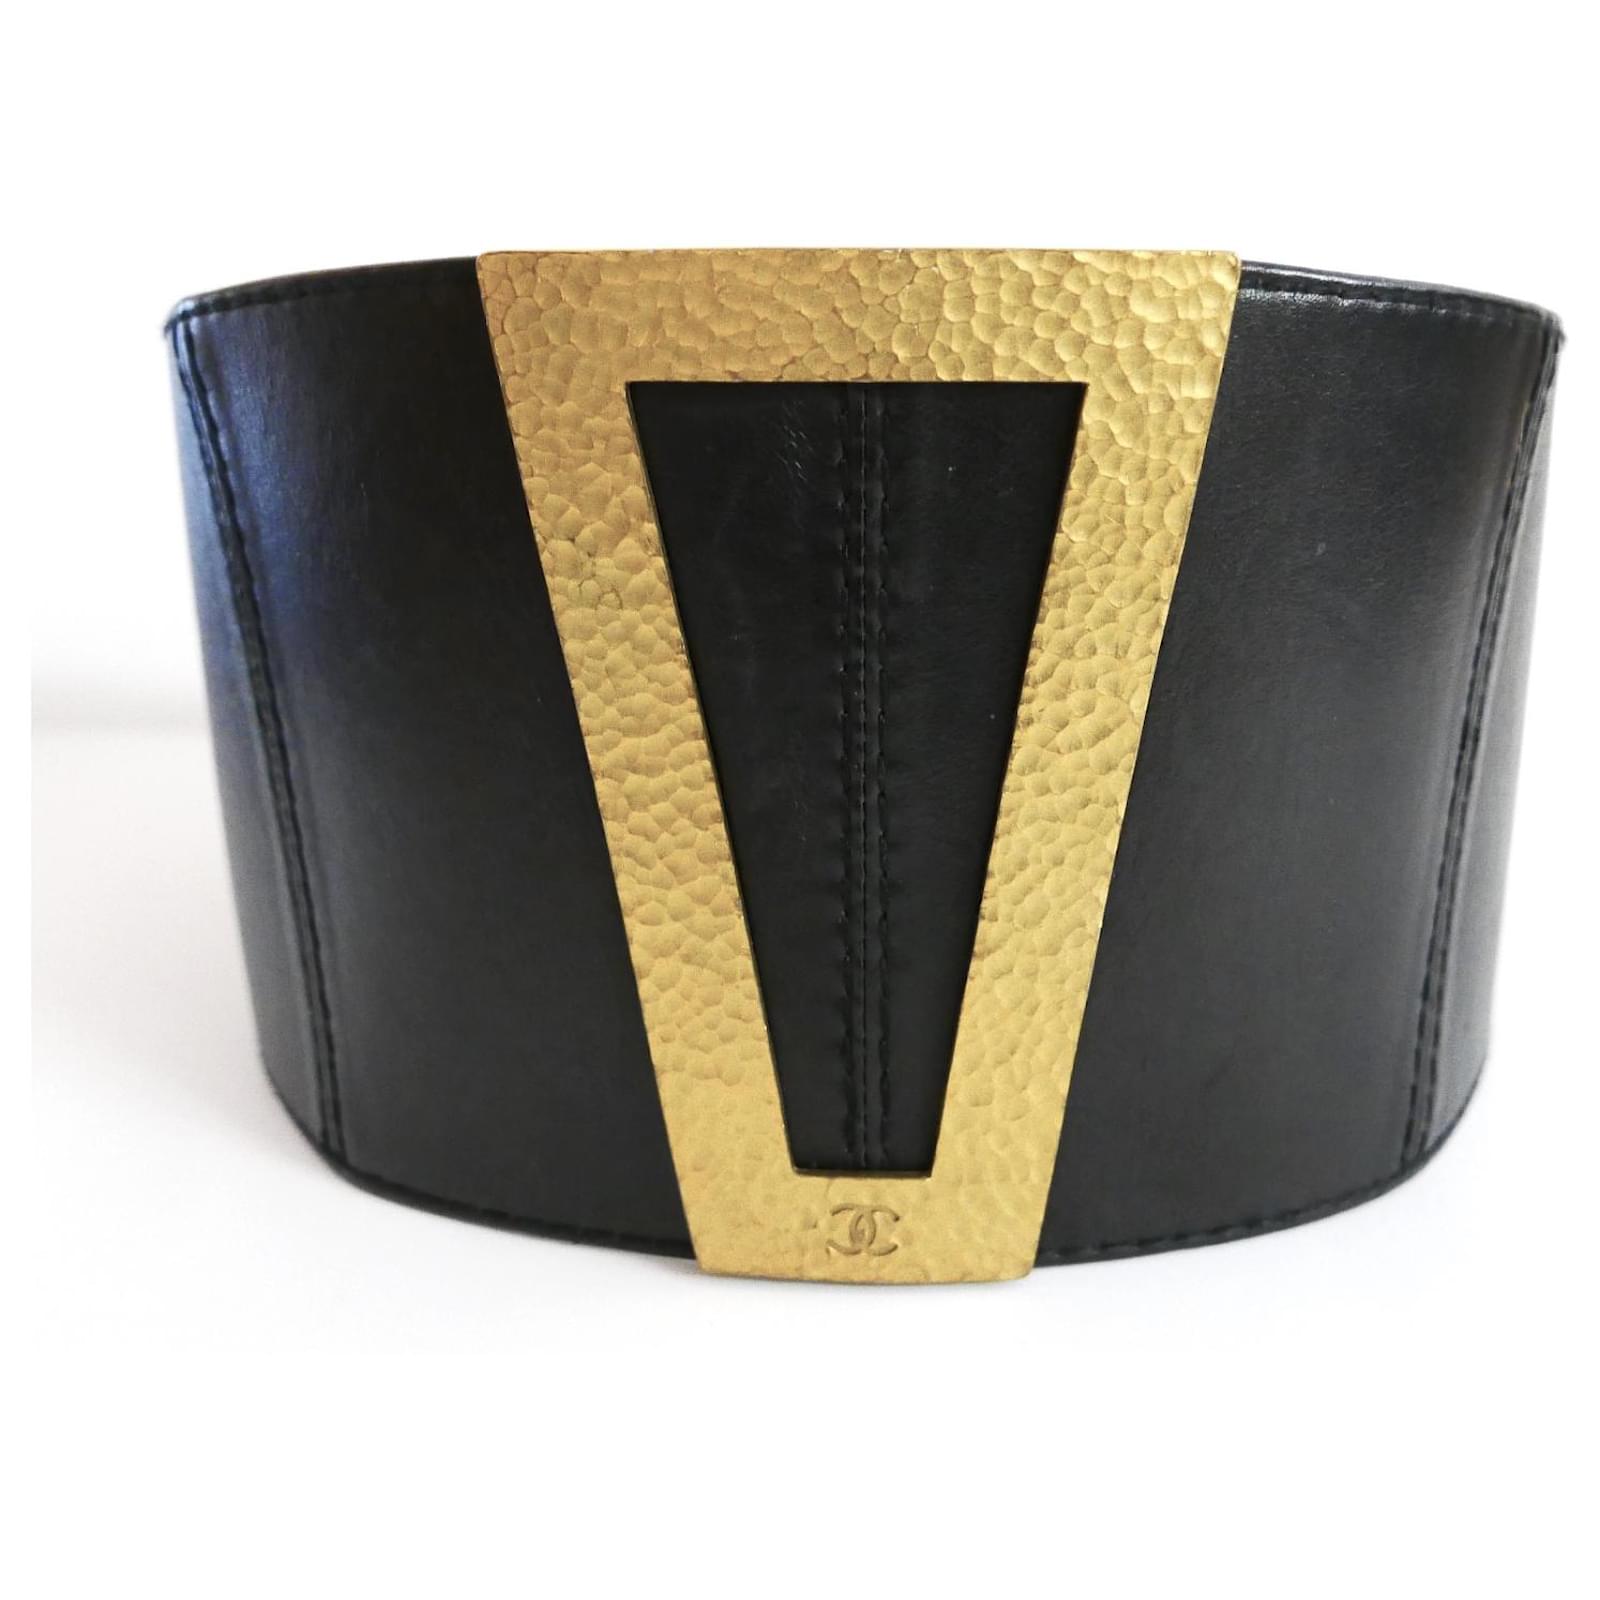 S/S 1996 'CC' Buckle Leather Belt